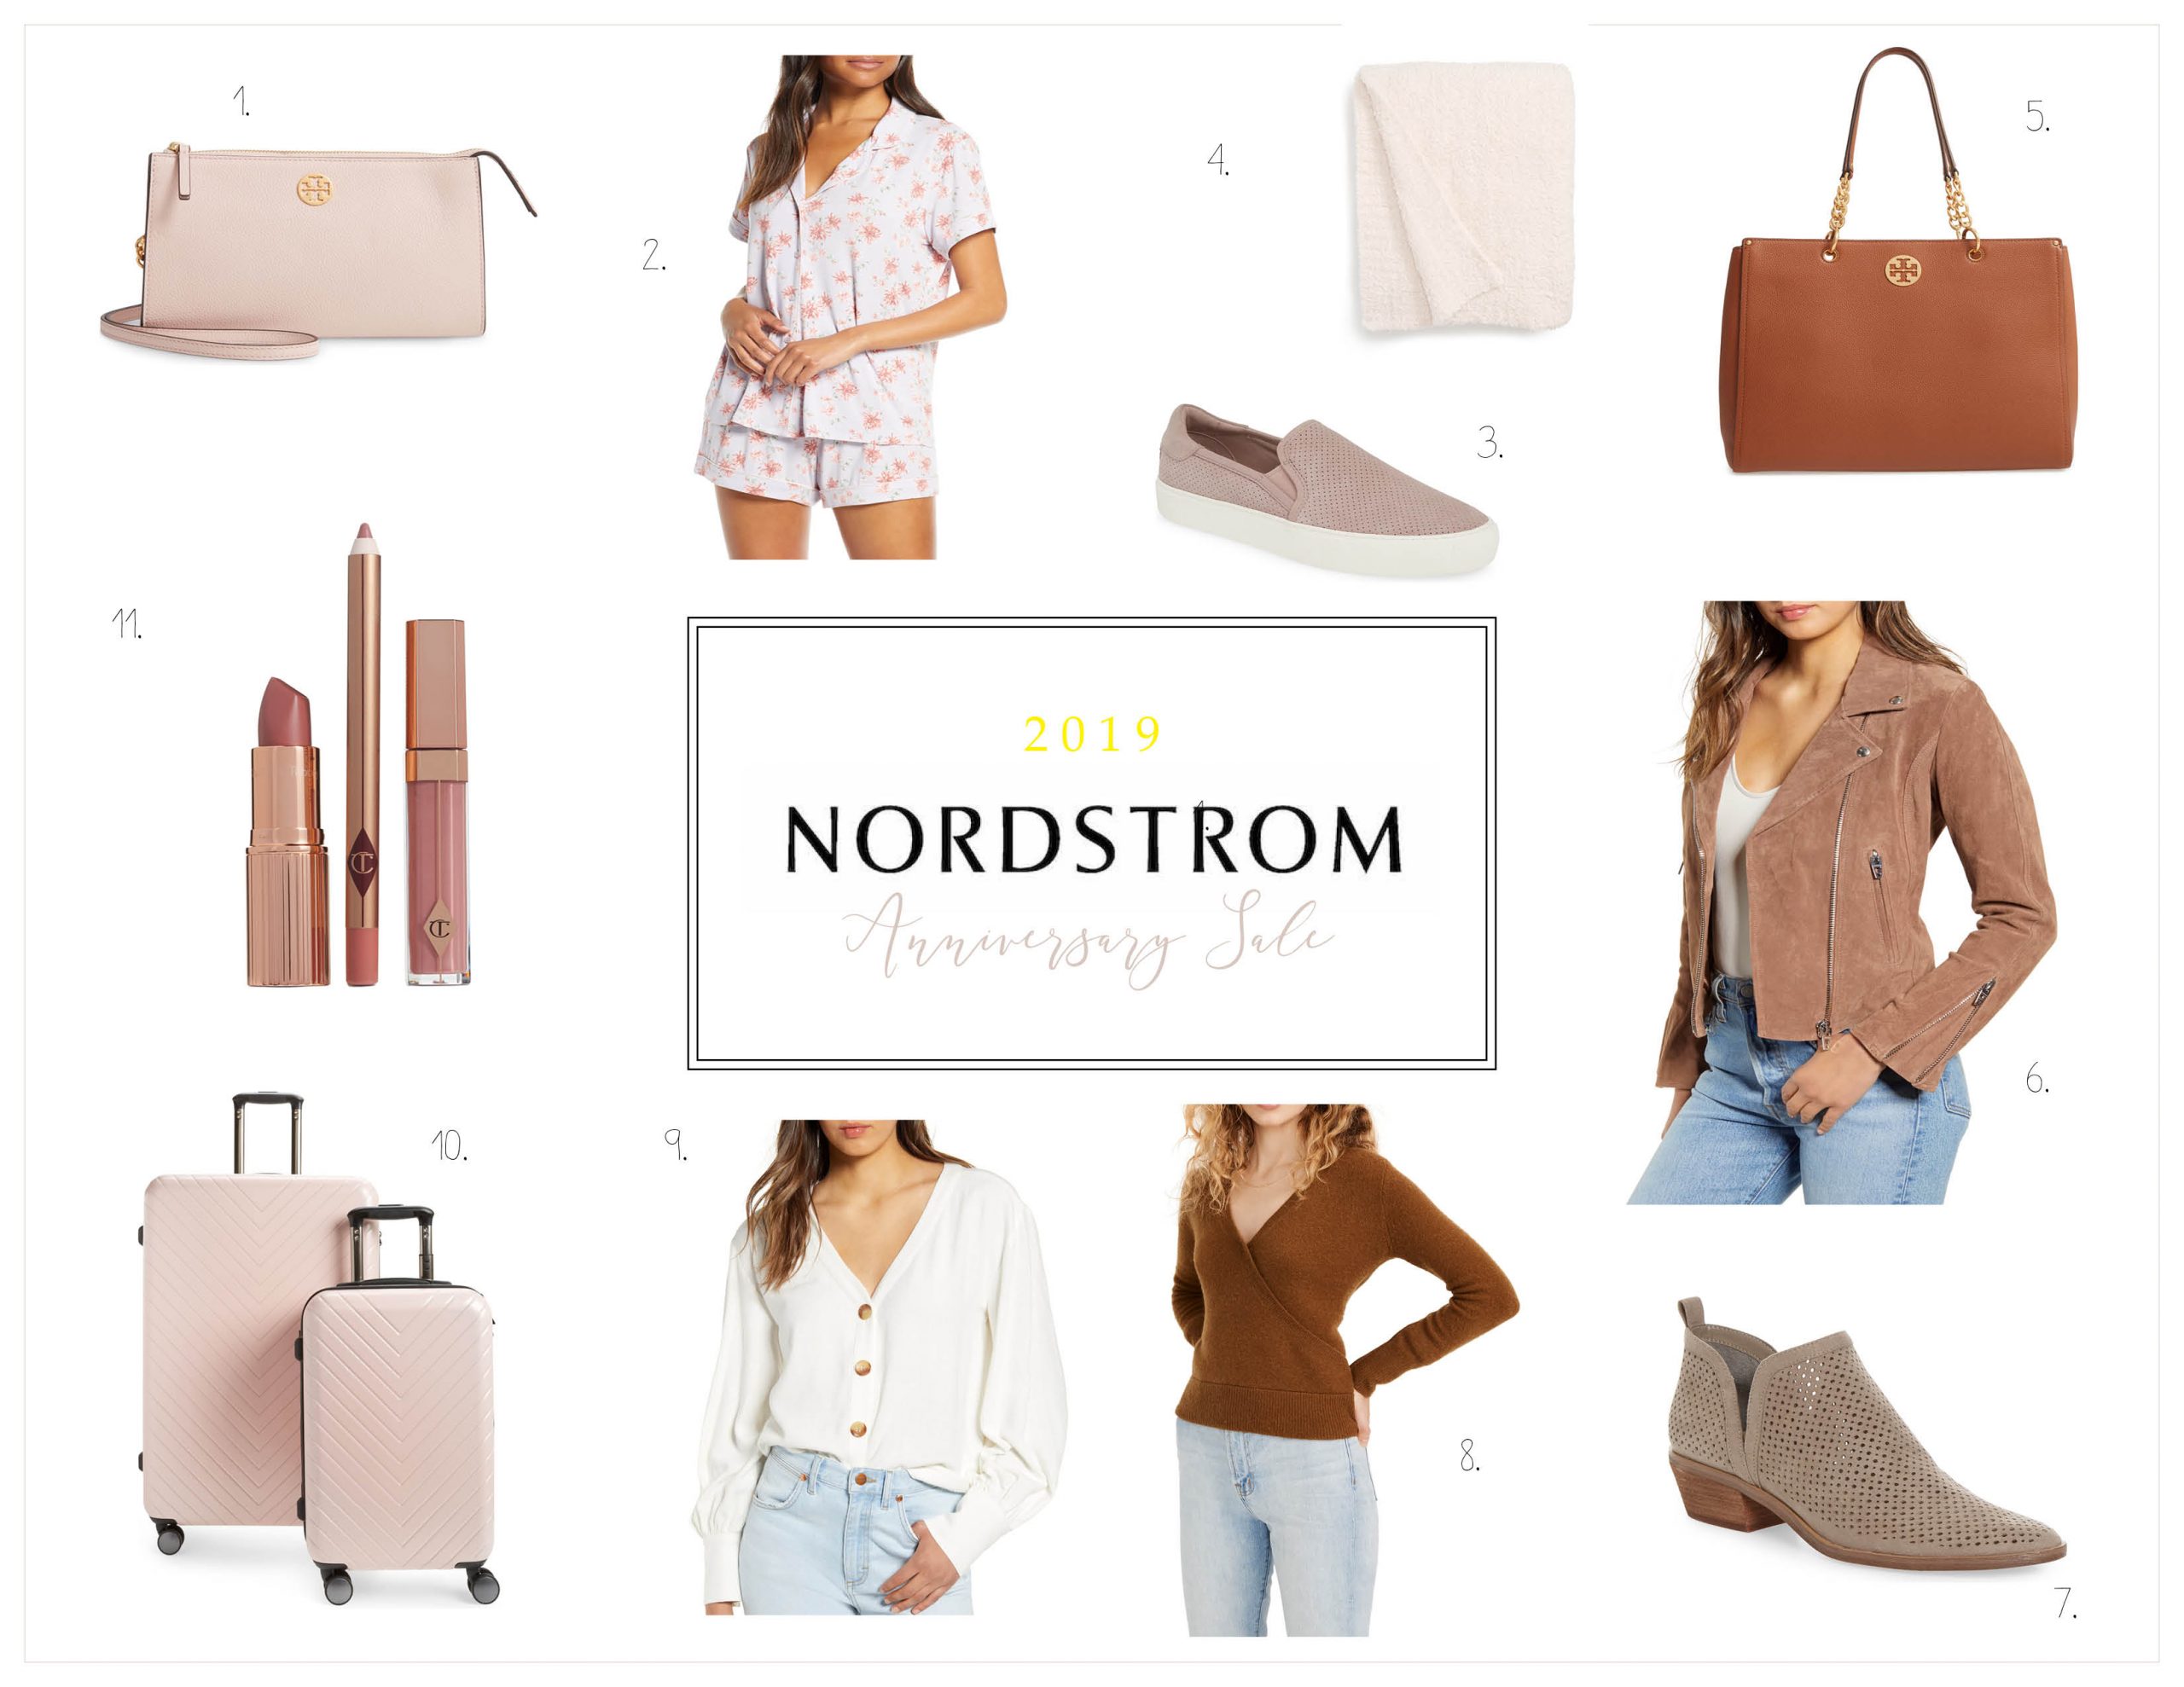 MY TOP PICKS FROM THE NORDSTROM ANNIVERSARY SALE 2019